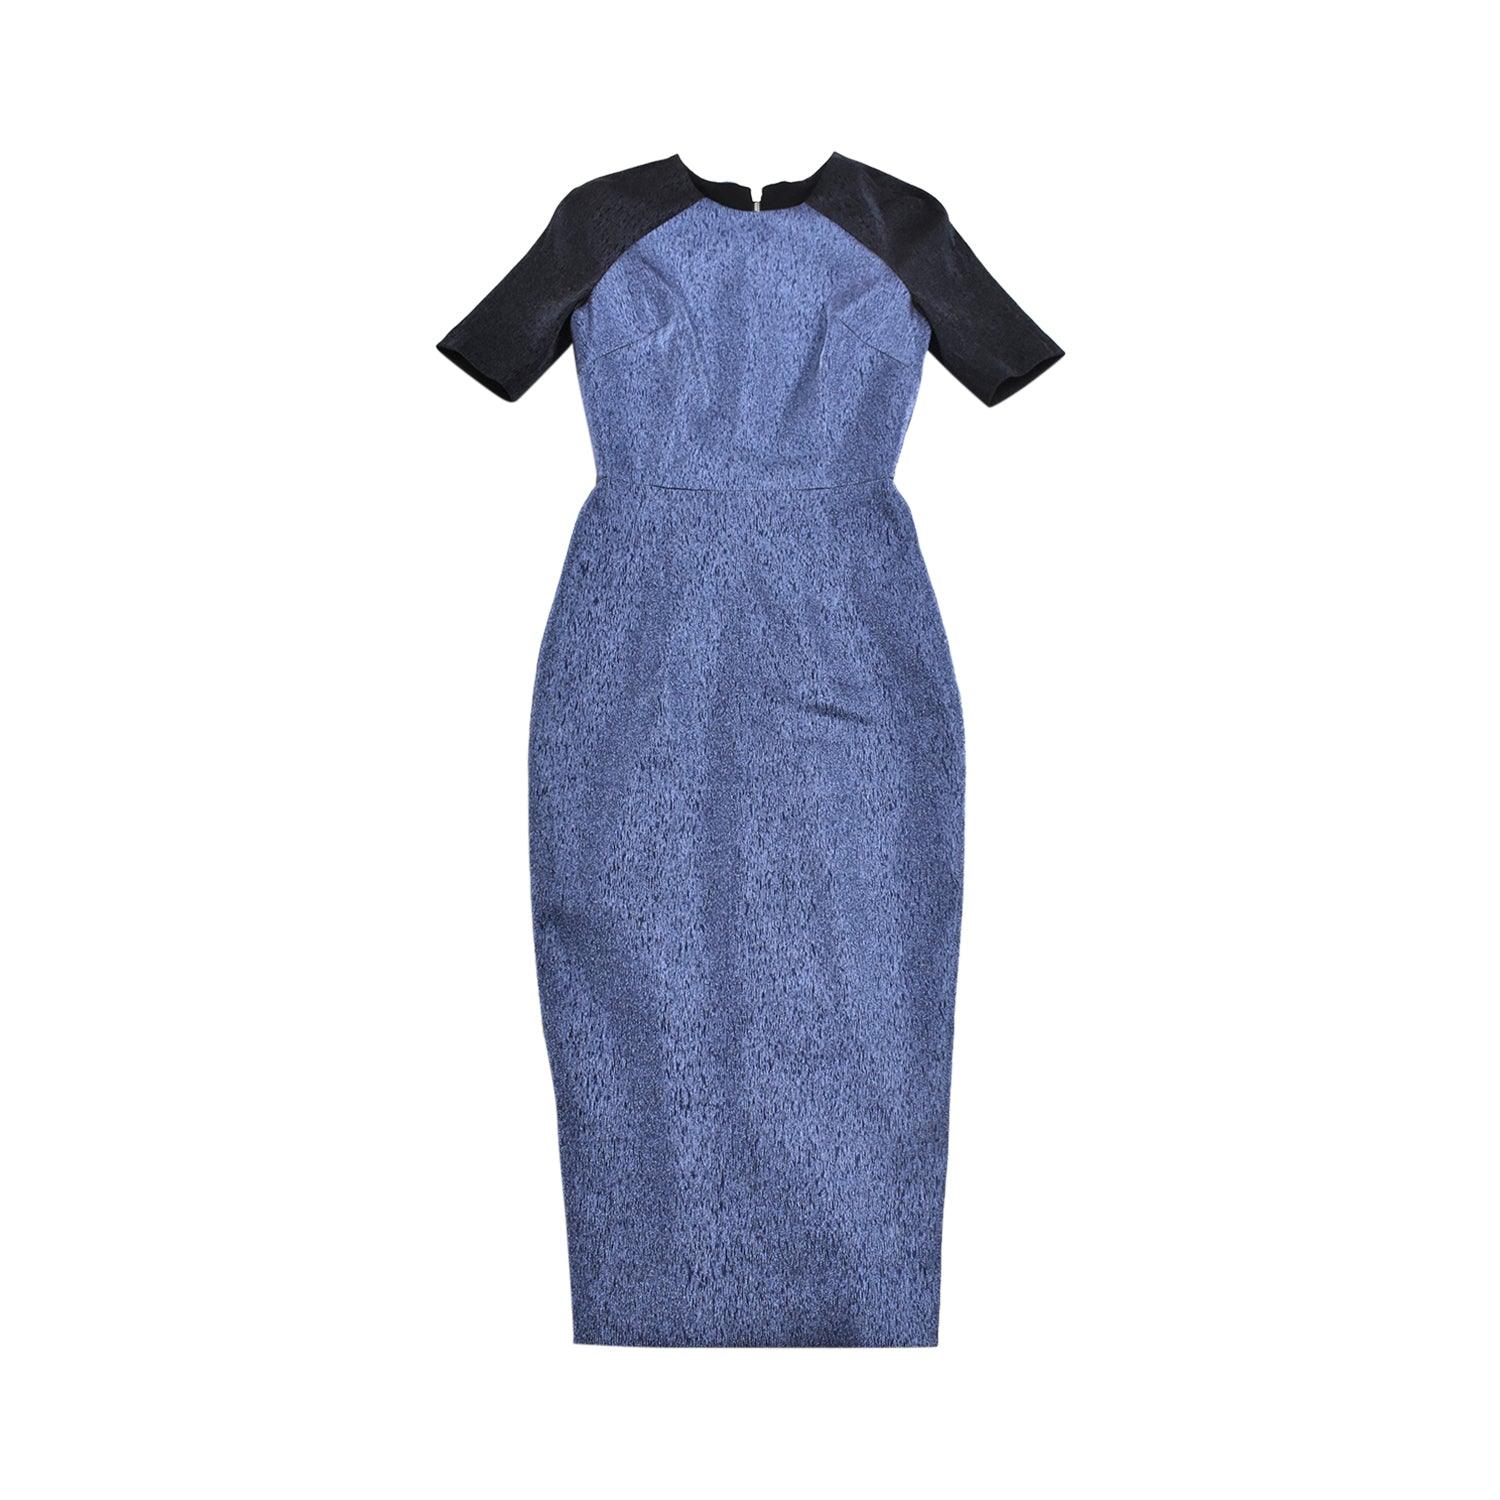 Alex Perry Dress - Women's 2 - Fashionably Yours